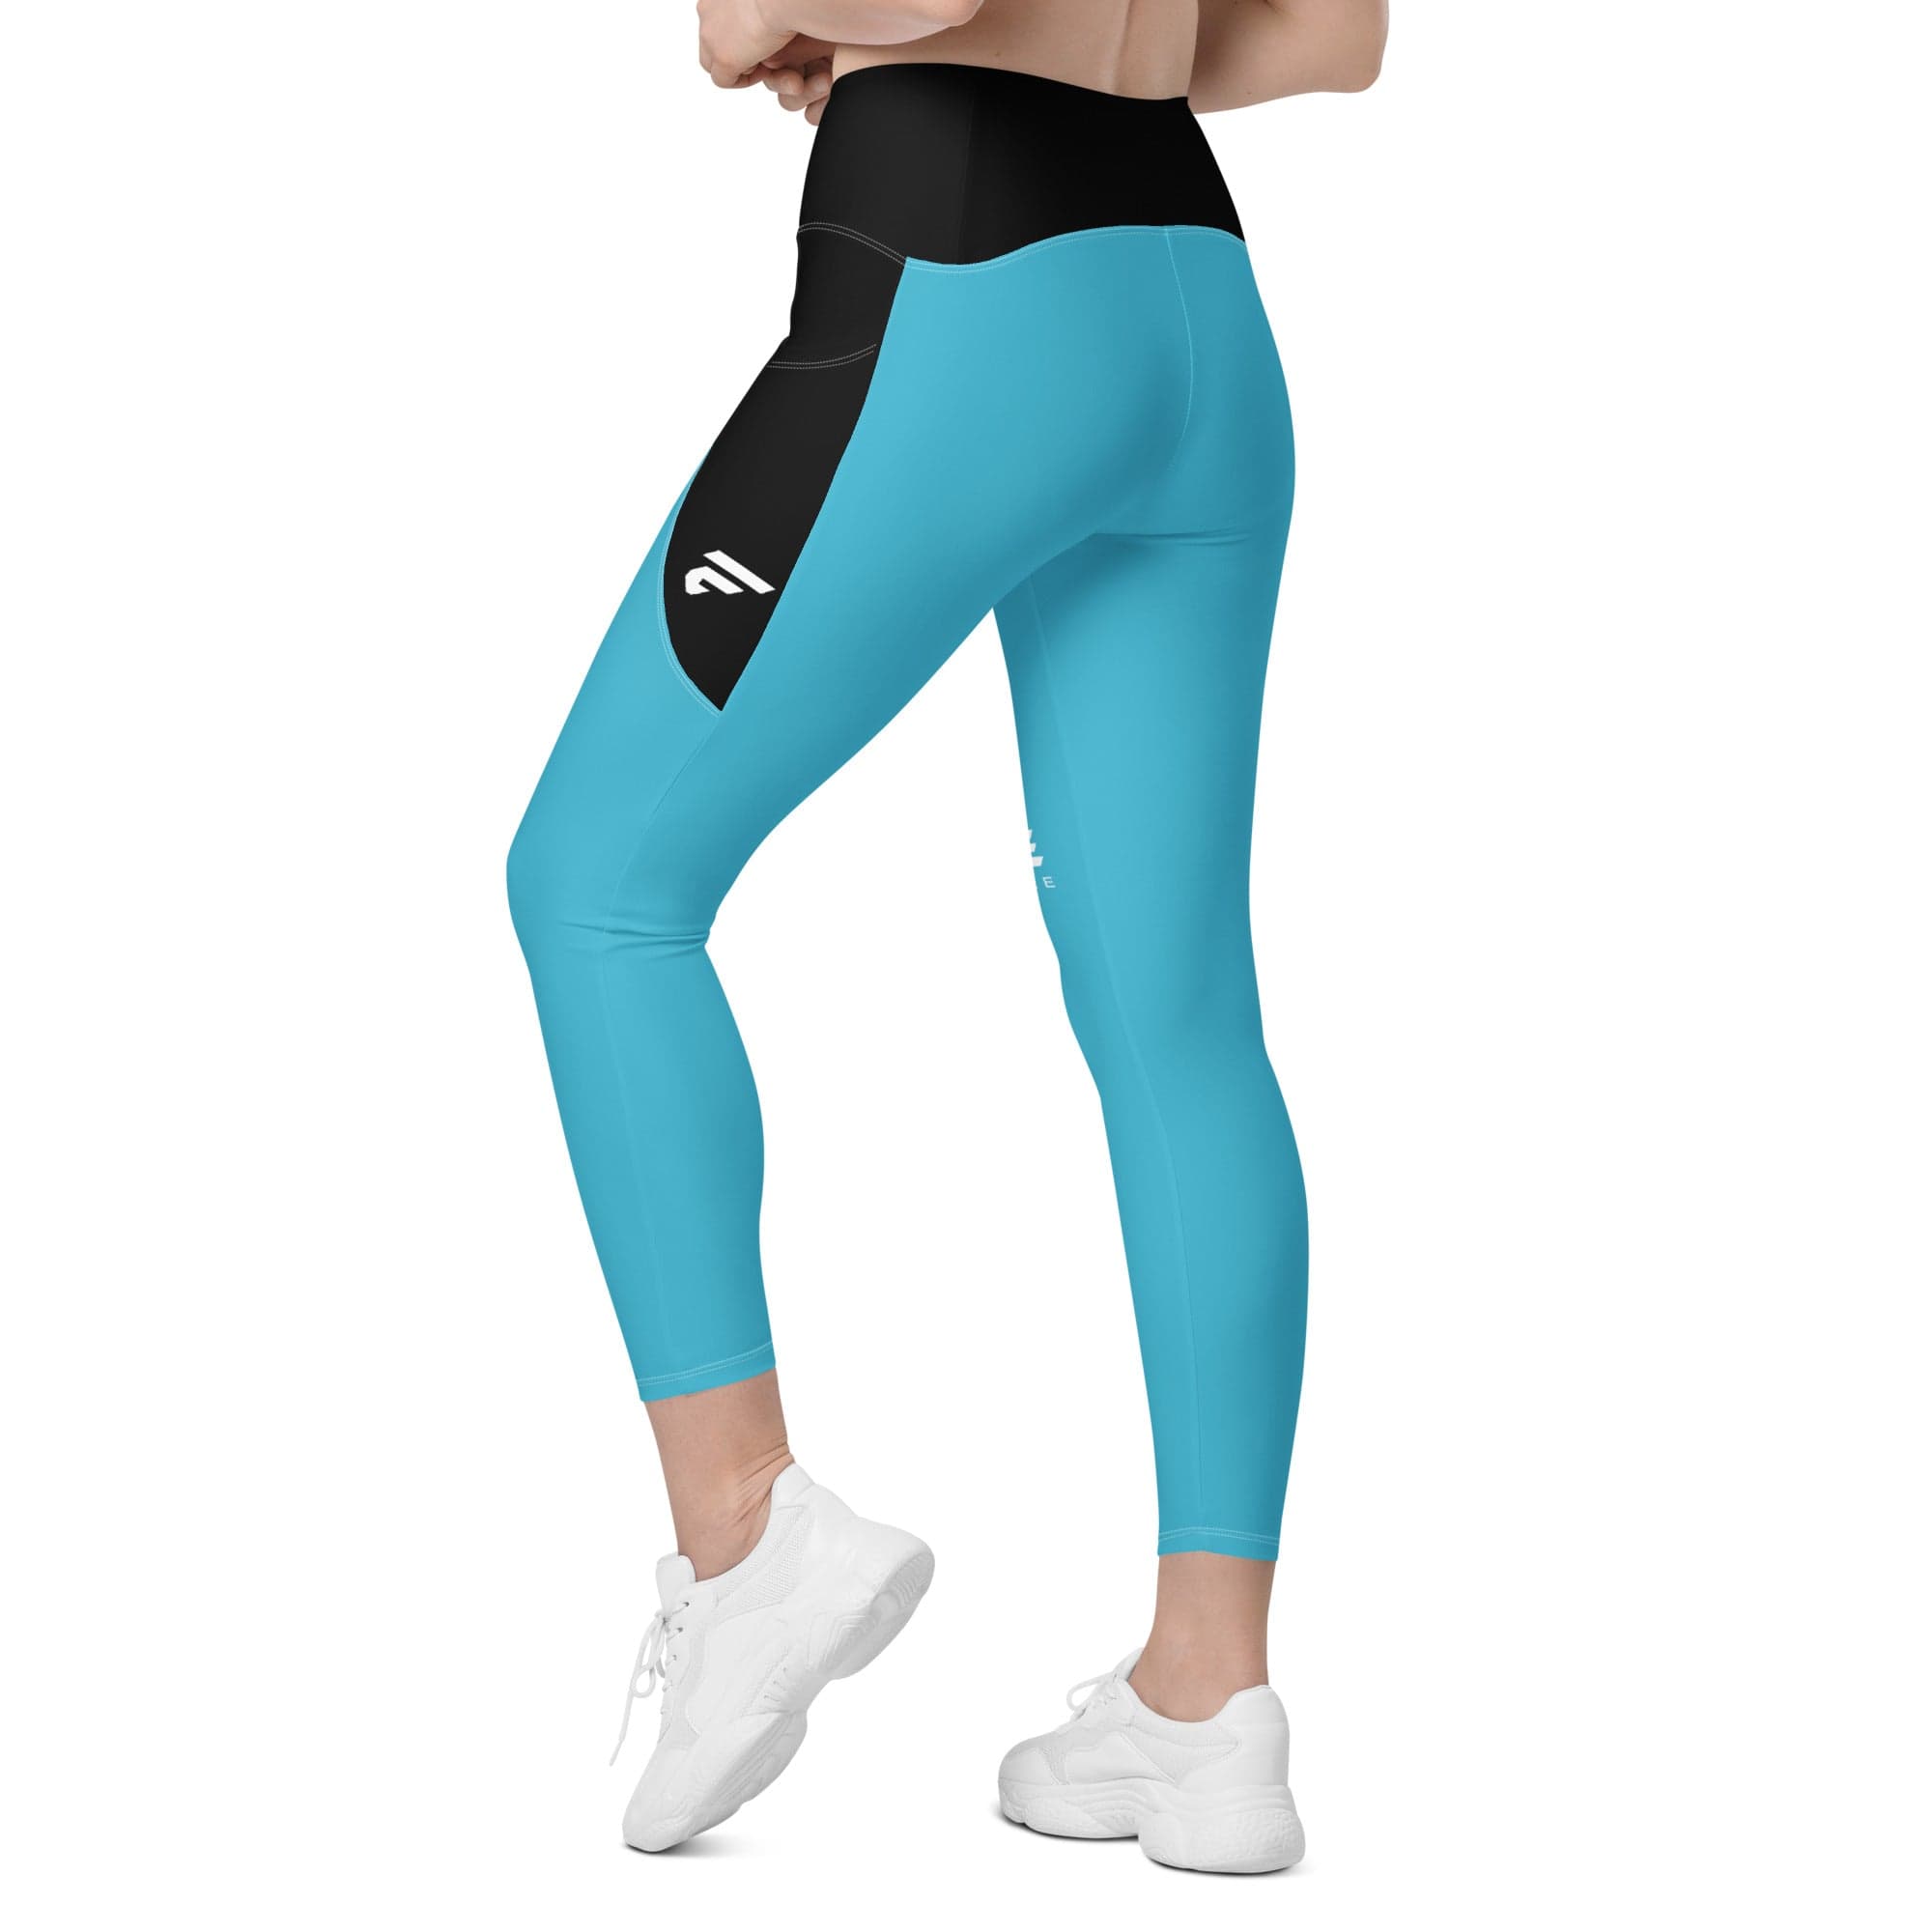 Fire Cornhole Leggings with pockets in light blue and black